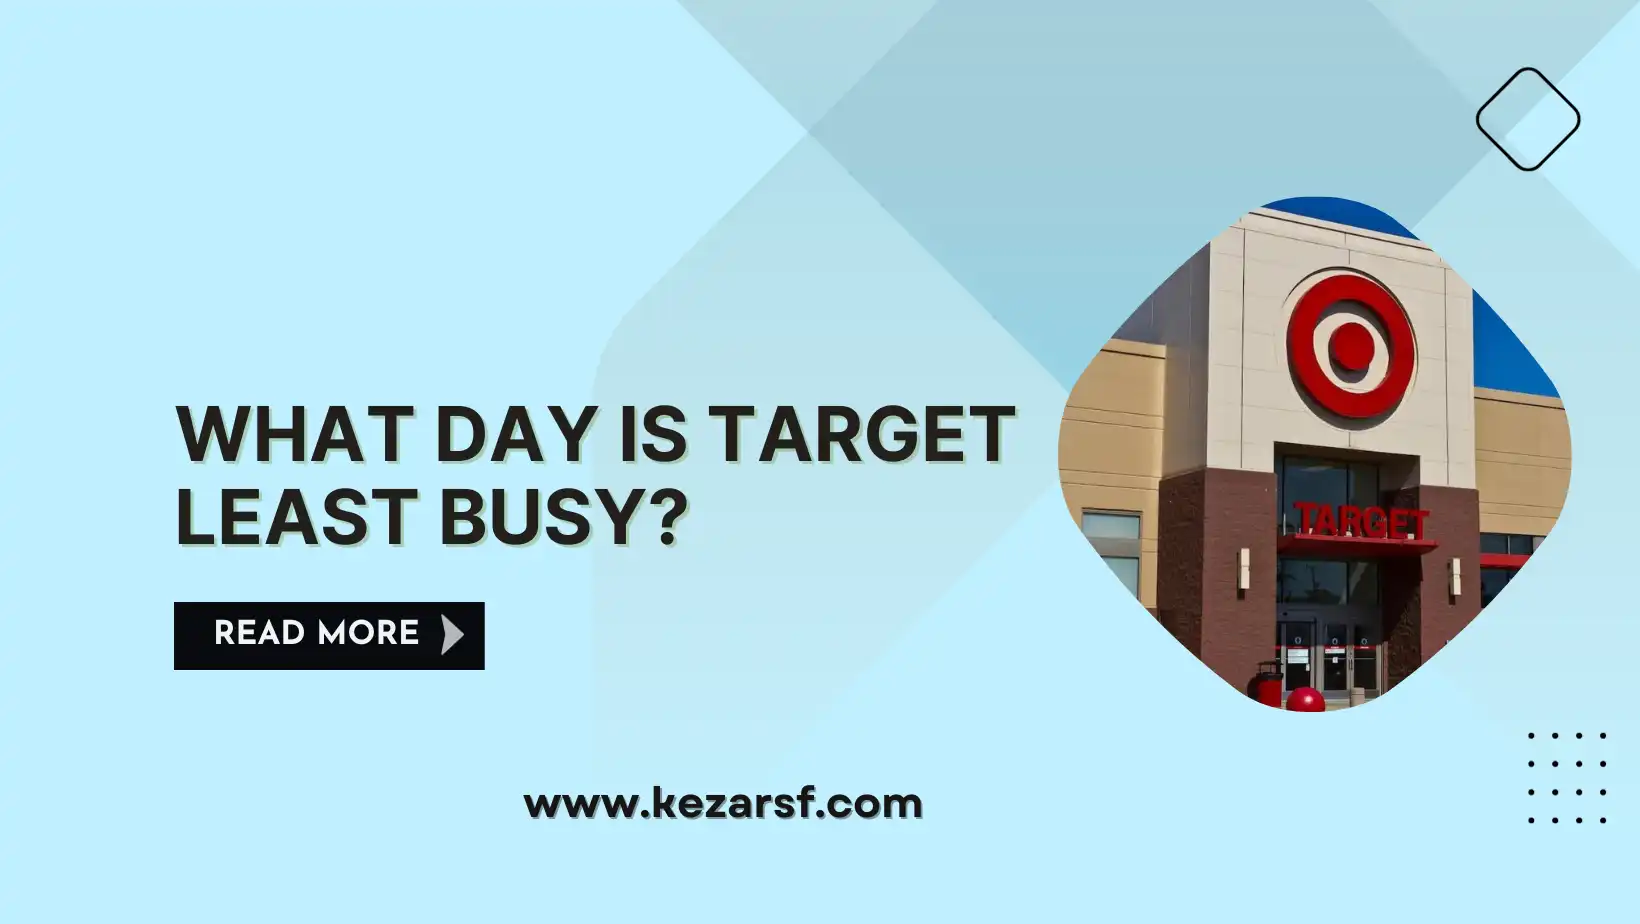 What Day is Target Least Busy?